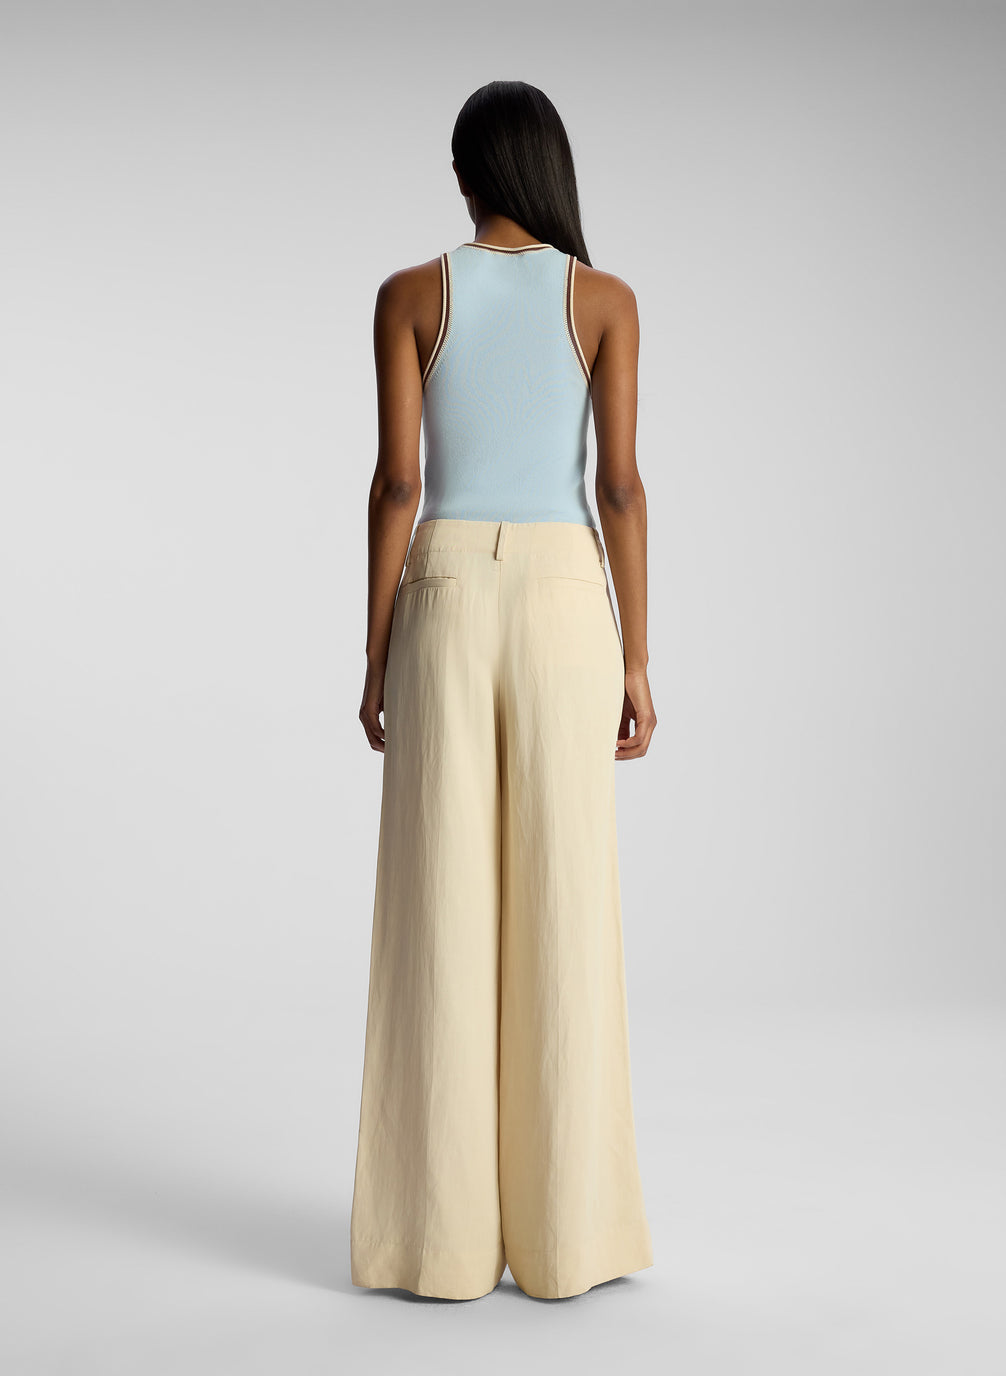 back  view of woman wearing light blue tank top and beige pants